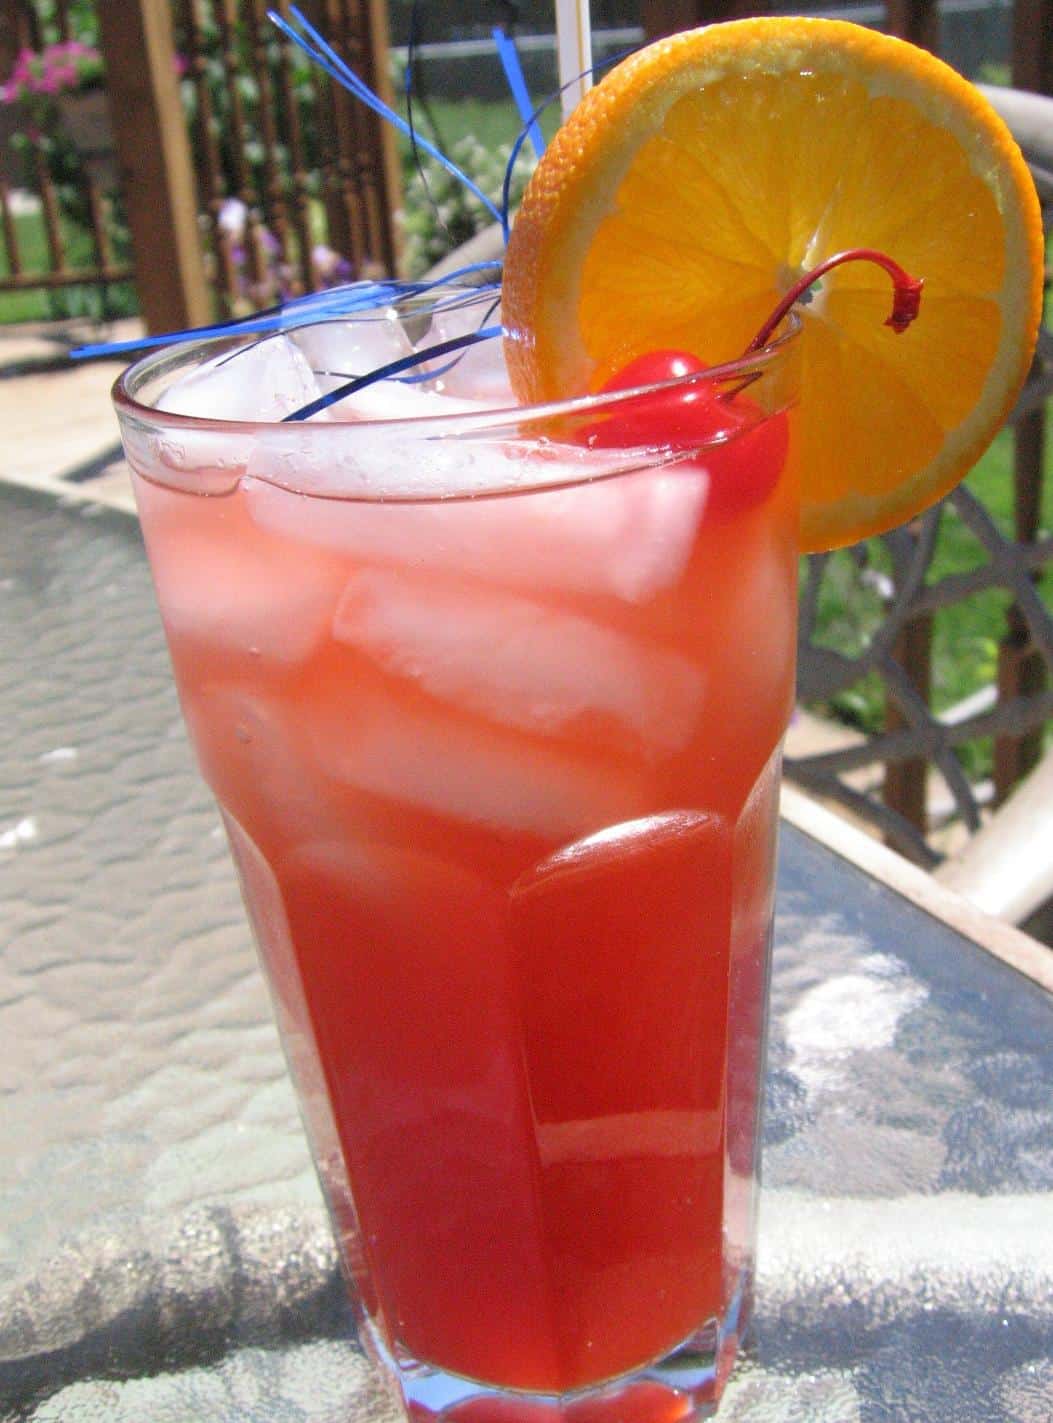  The Rum Relaxer: A tropical escape in a glass.